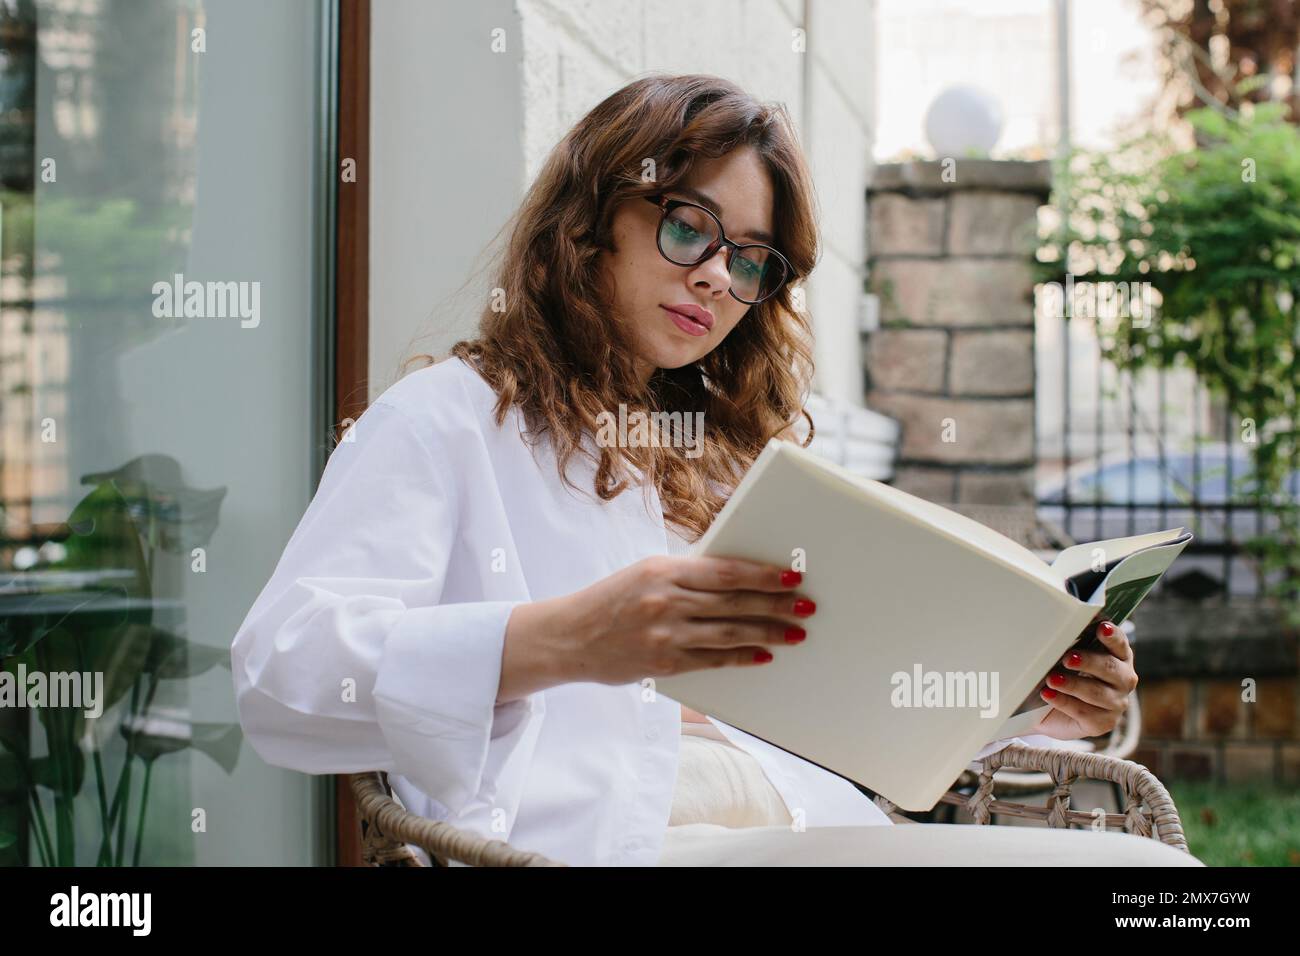 Mockup image magazine book. The girl at the coffee shop table reading magazine. Stock Photo